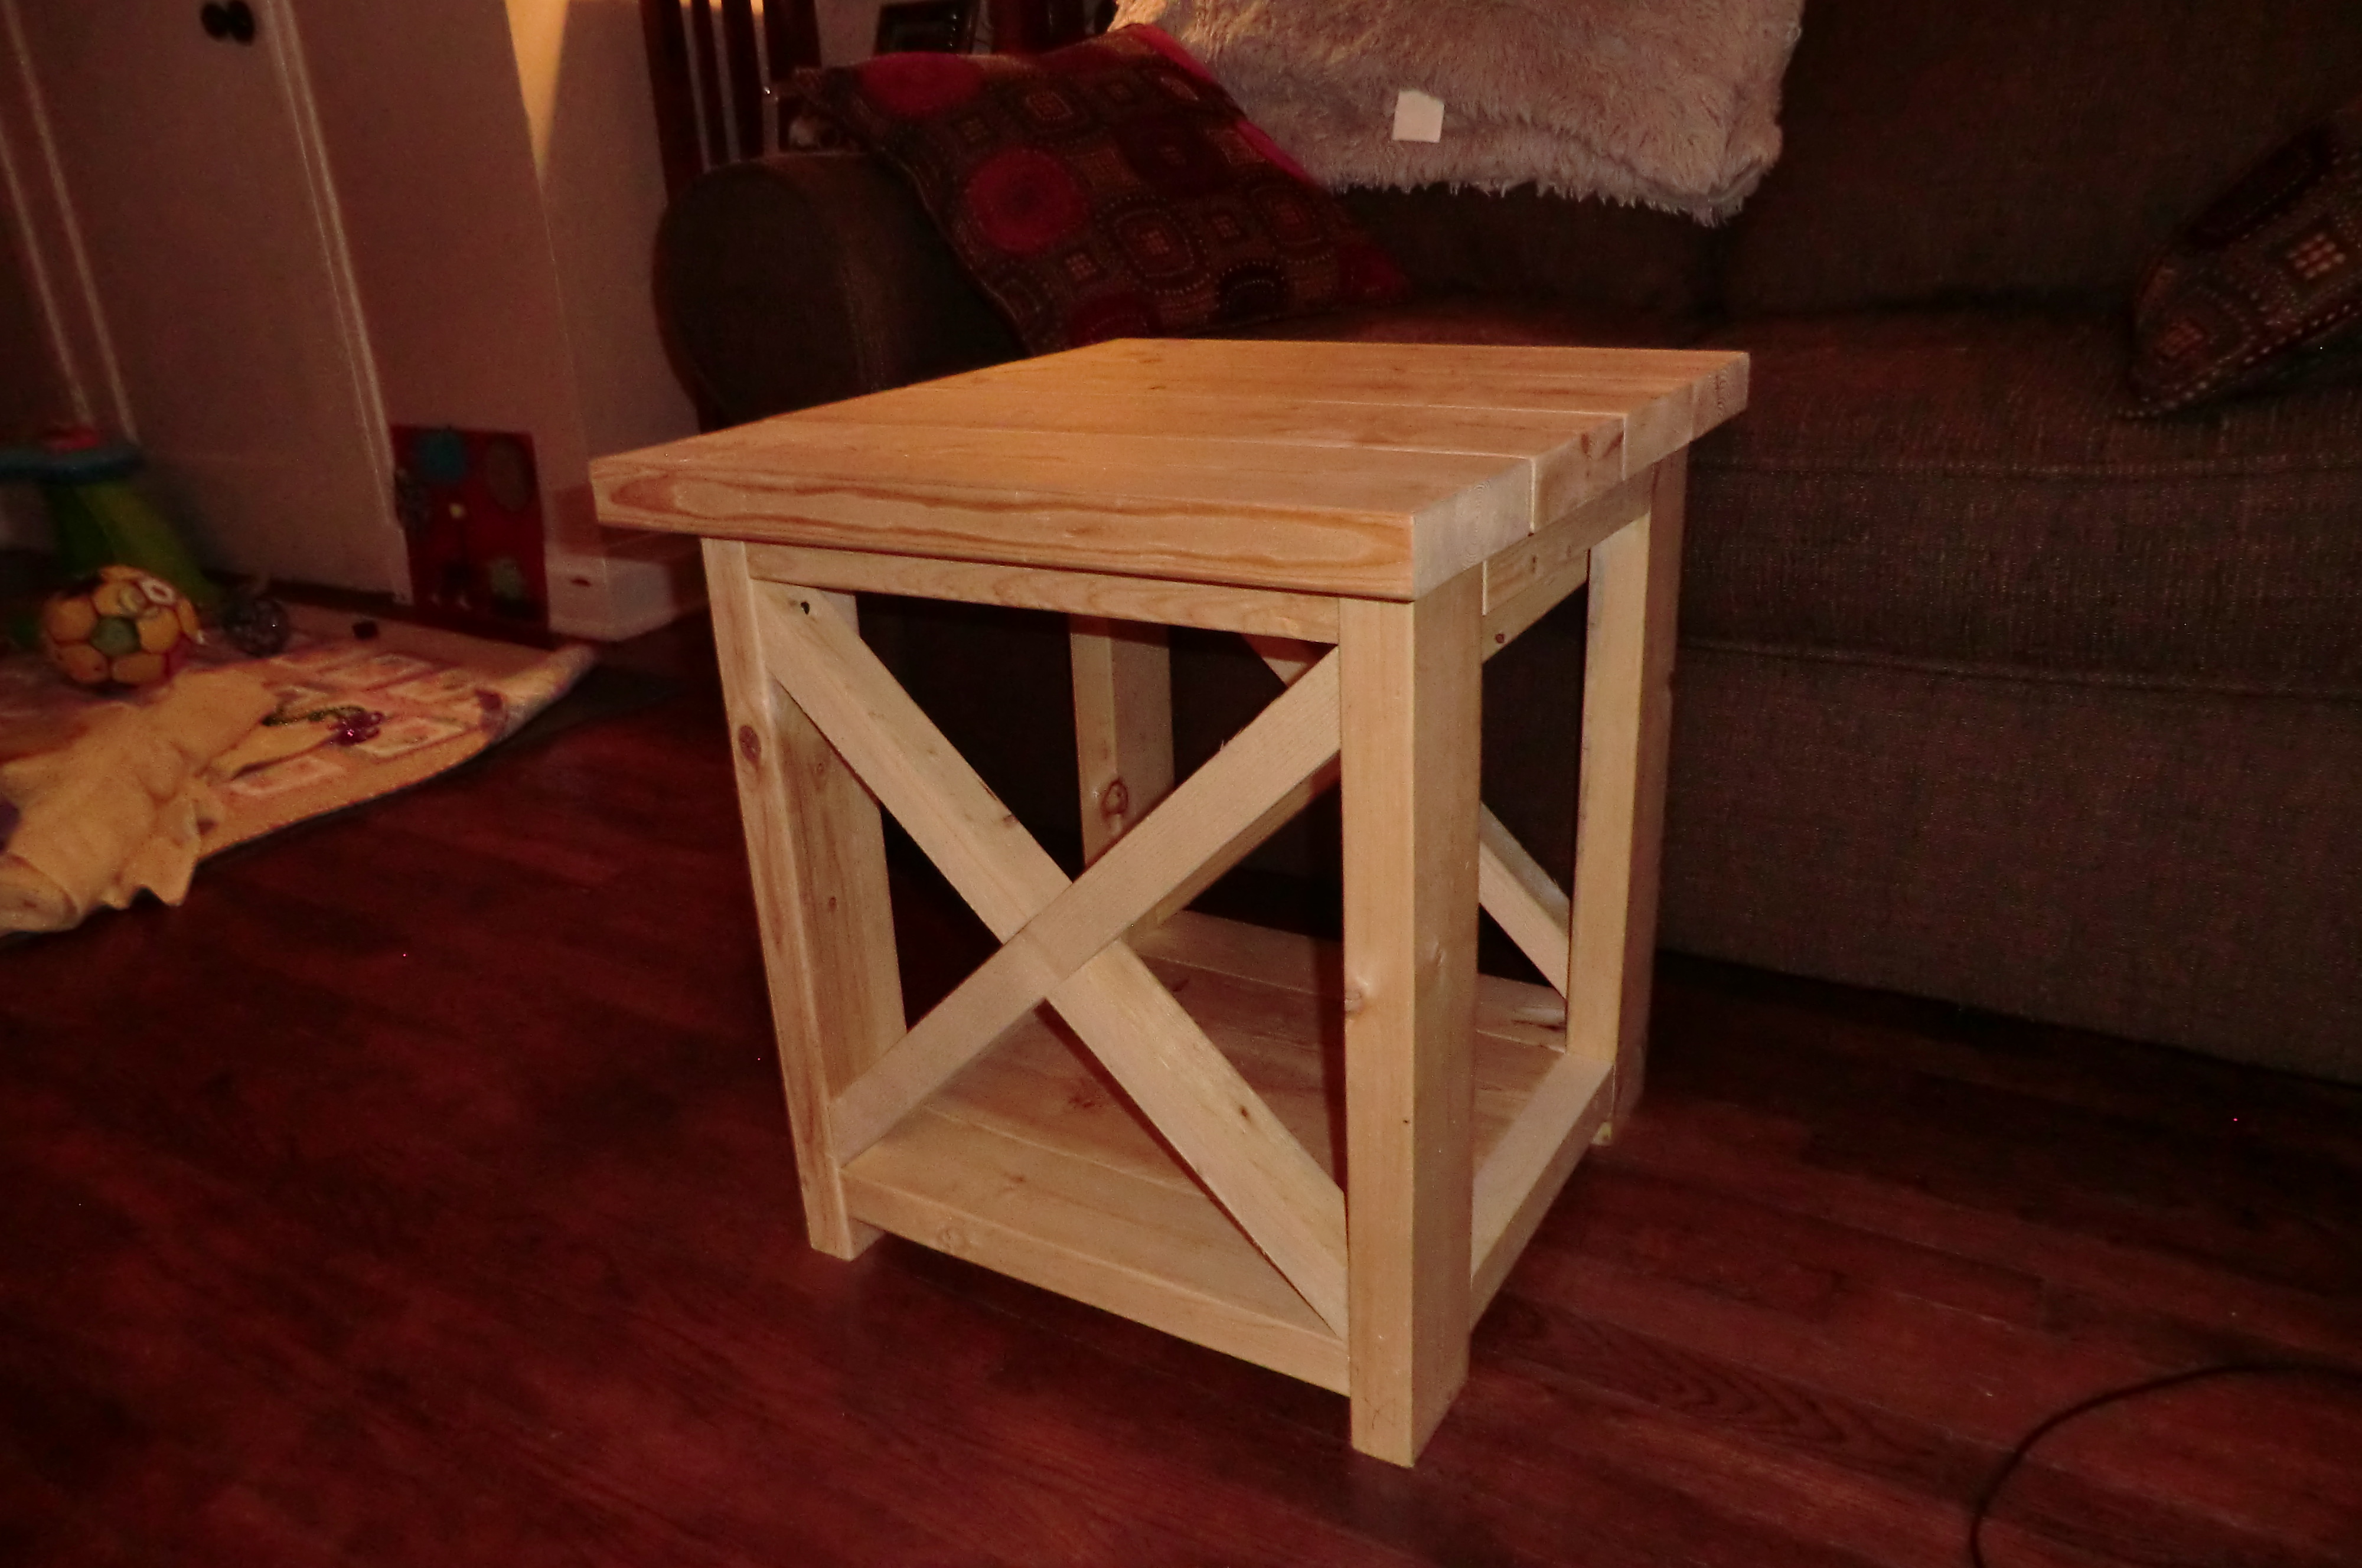 ana white smaller rustic end table diy projects accent colorful tables and oak bedside small red farmhouse plans west elm emmerson aluminum patio furniture unique fall placemats